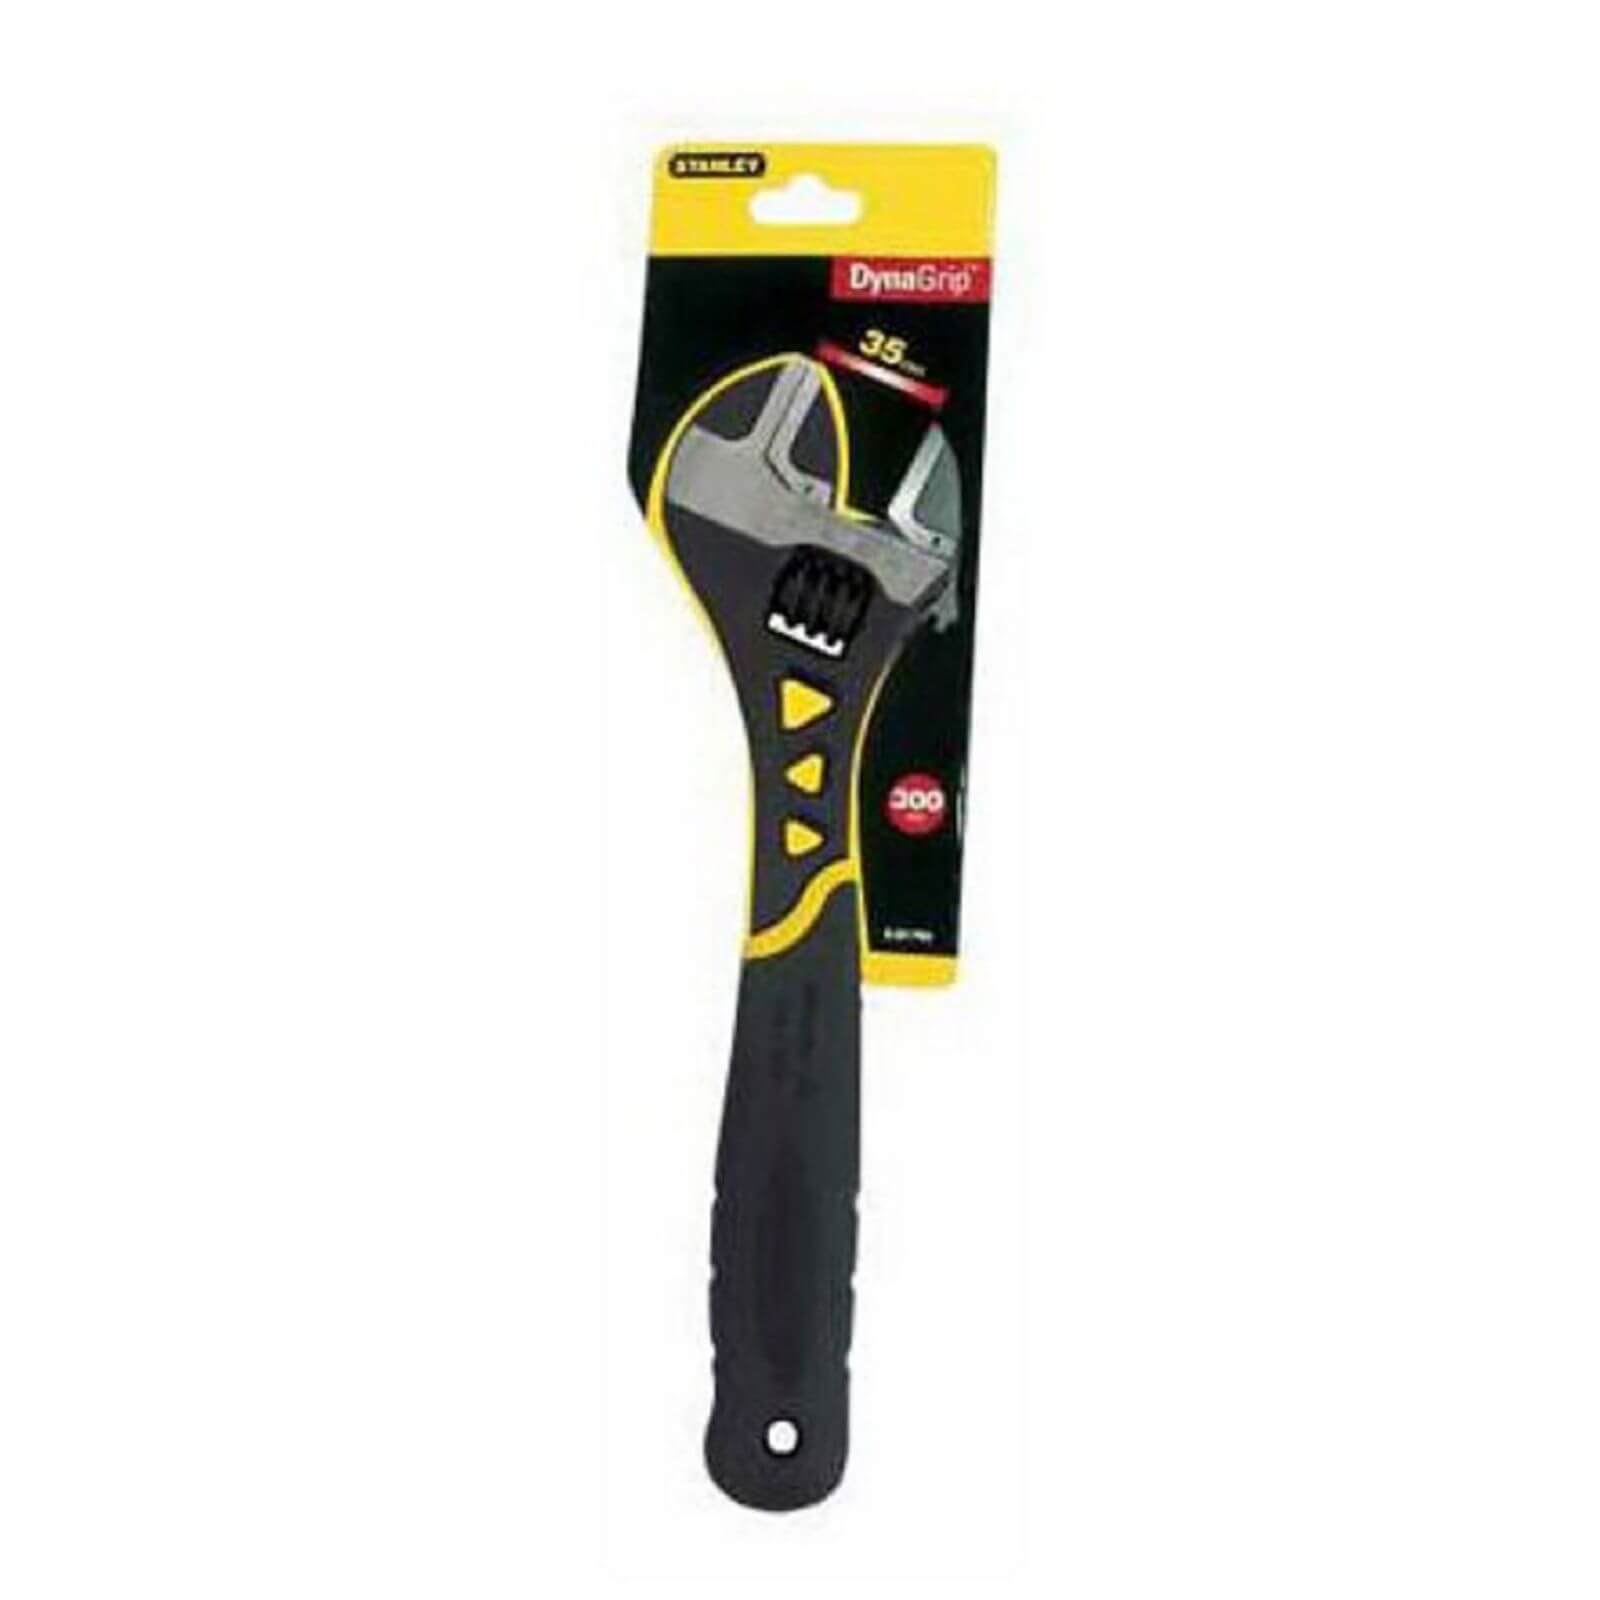 Photo of Stanley Dynagrip Adjustable Wrench - 254mm